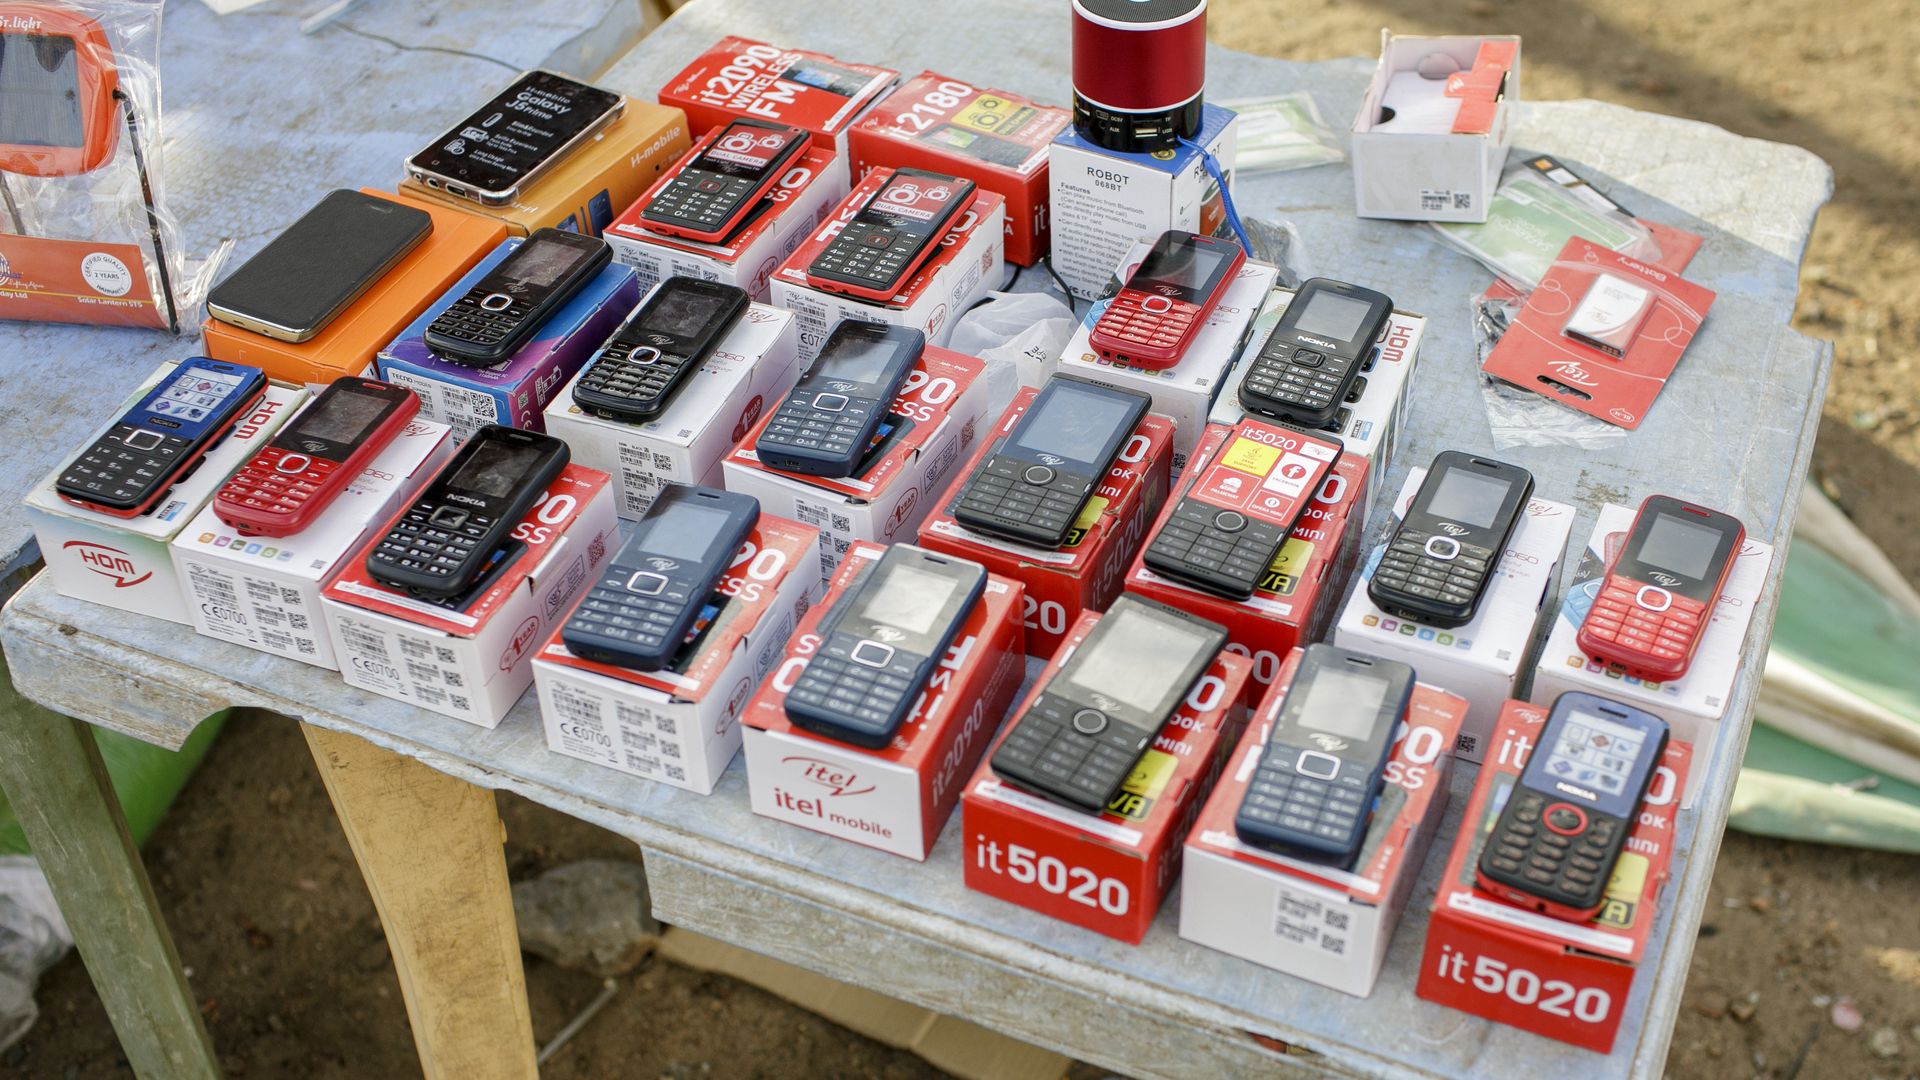 Cell phones placed on a table, street trade in Talek on May 17, 2017 in Talek, Kenya. 